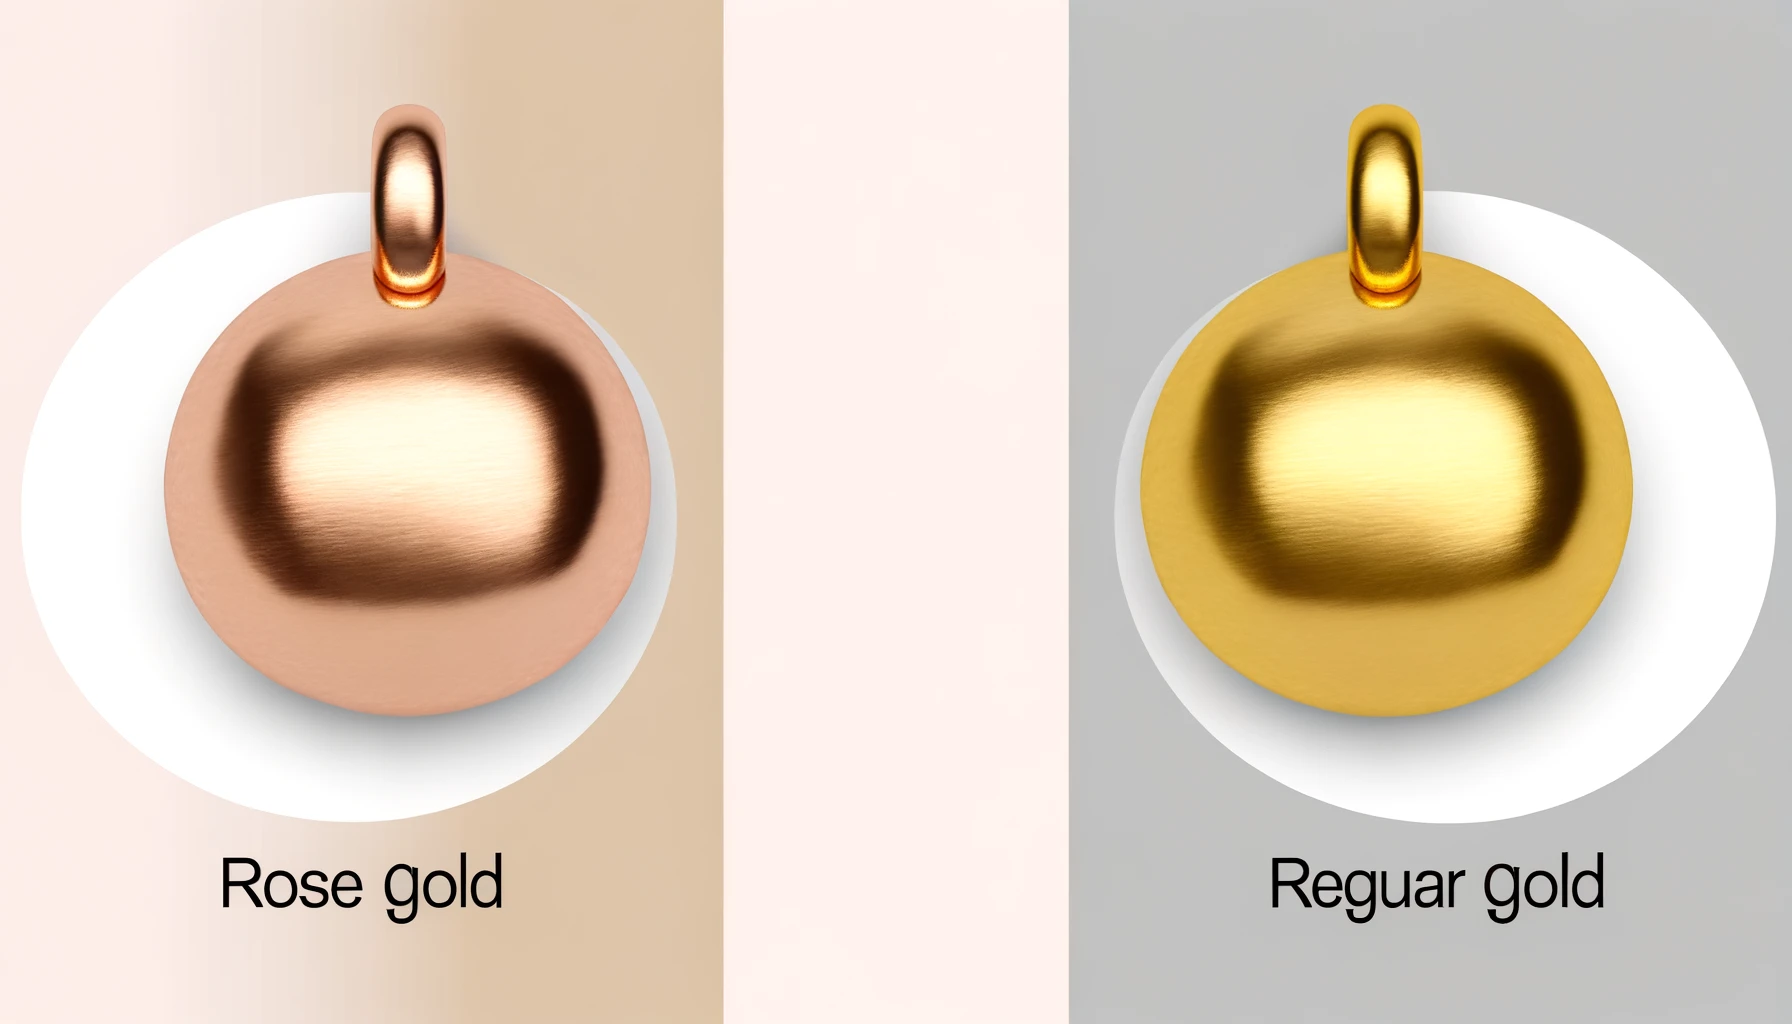 Horizontal comparison of rose gold and regular gold objects, with rose gold displaying its pinkish hue on the left and regular gold showcasing its yellow luster on the right against a neutral background.